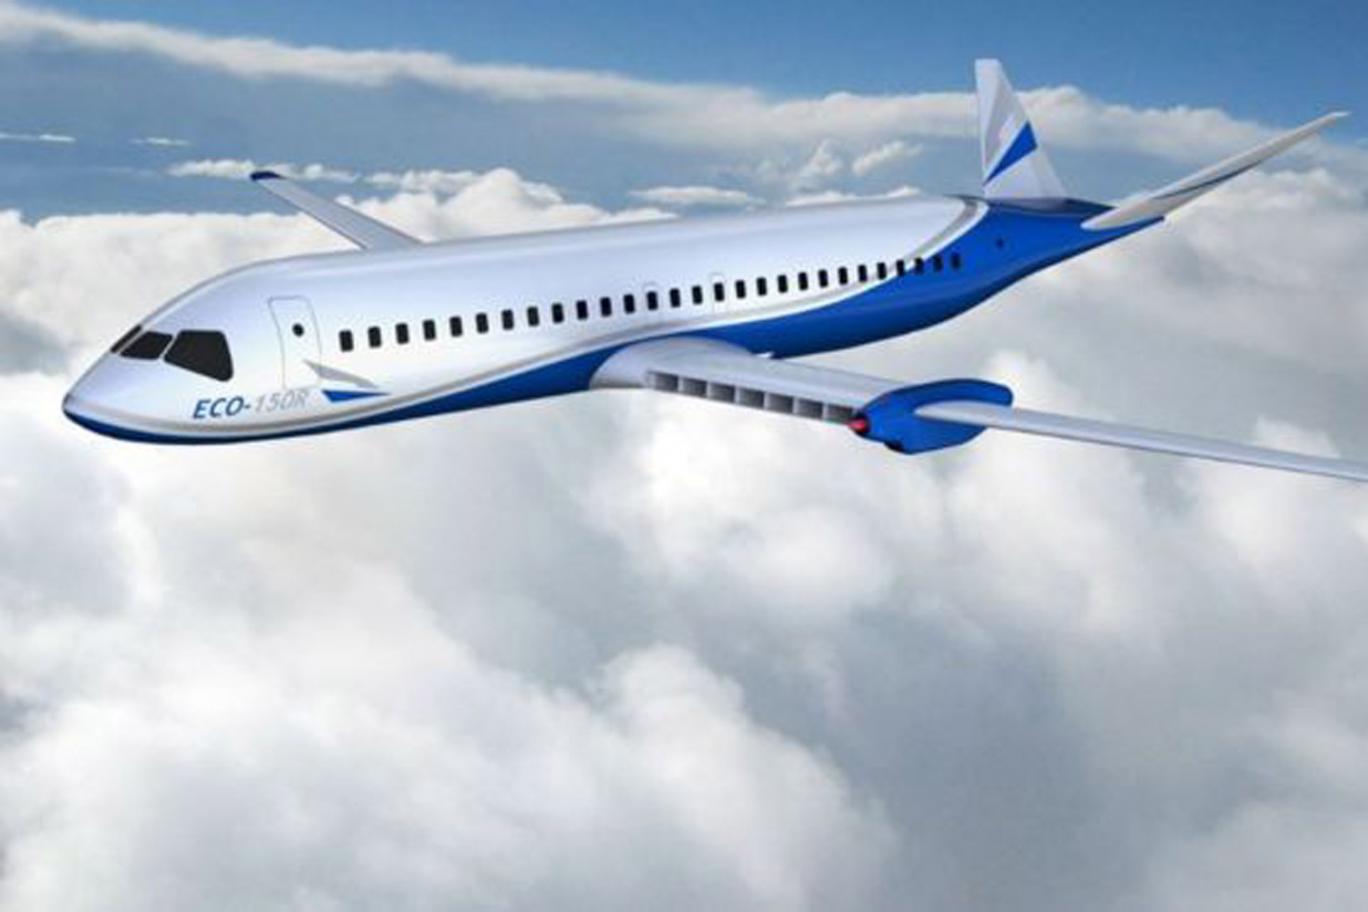 Electric planes could fly from London to Paris